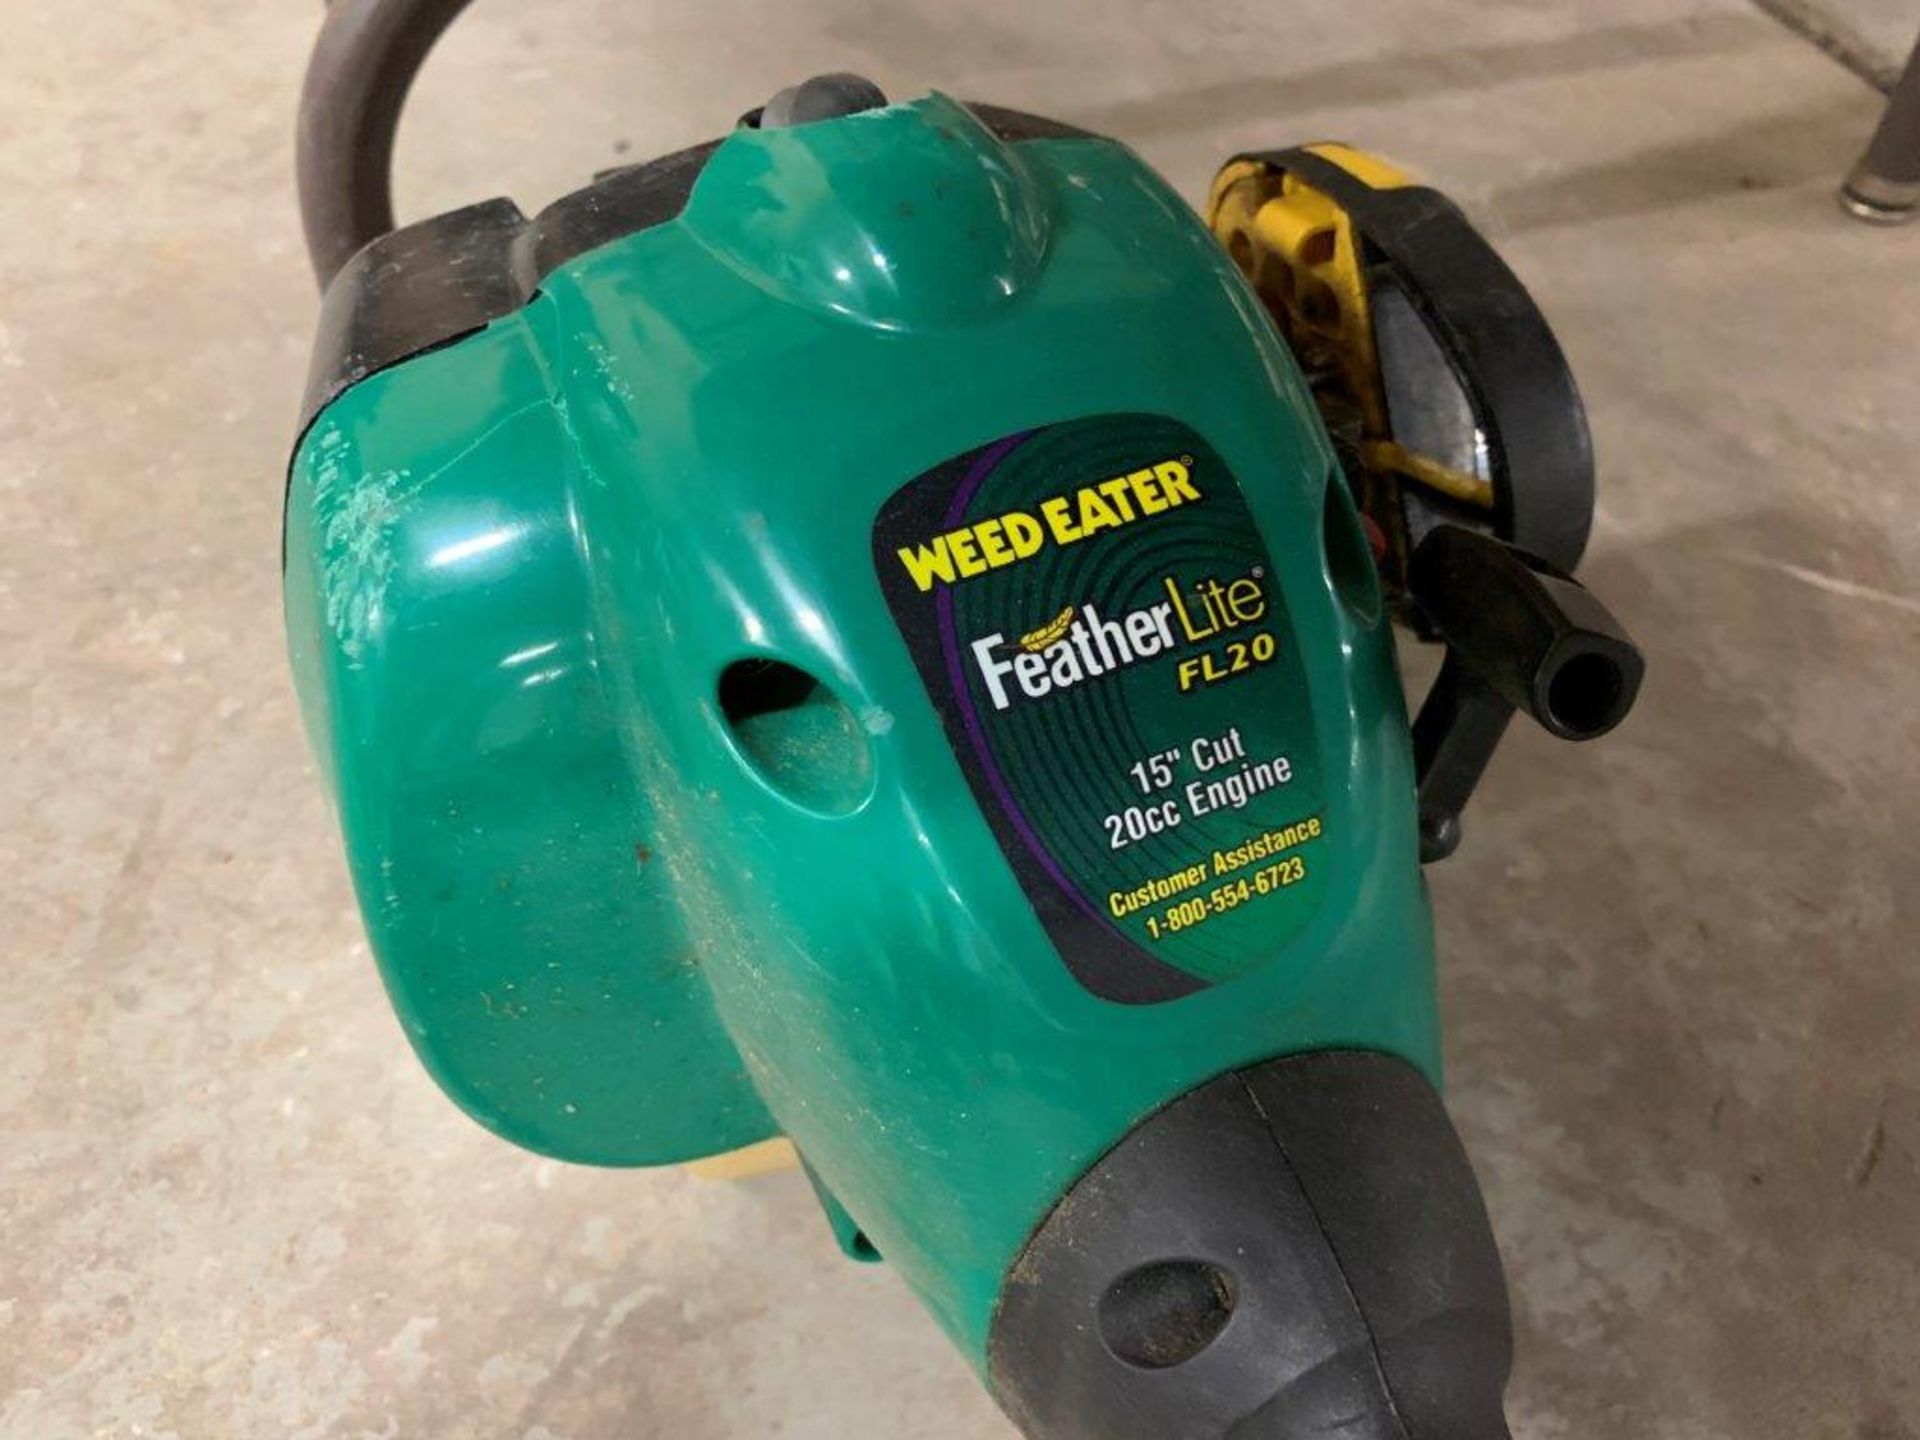 A25 - FEATHERLITE WEED EATER NFL20 15IN 20CC ENGINE - Image 2 of 3